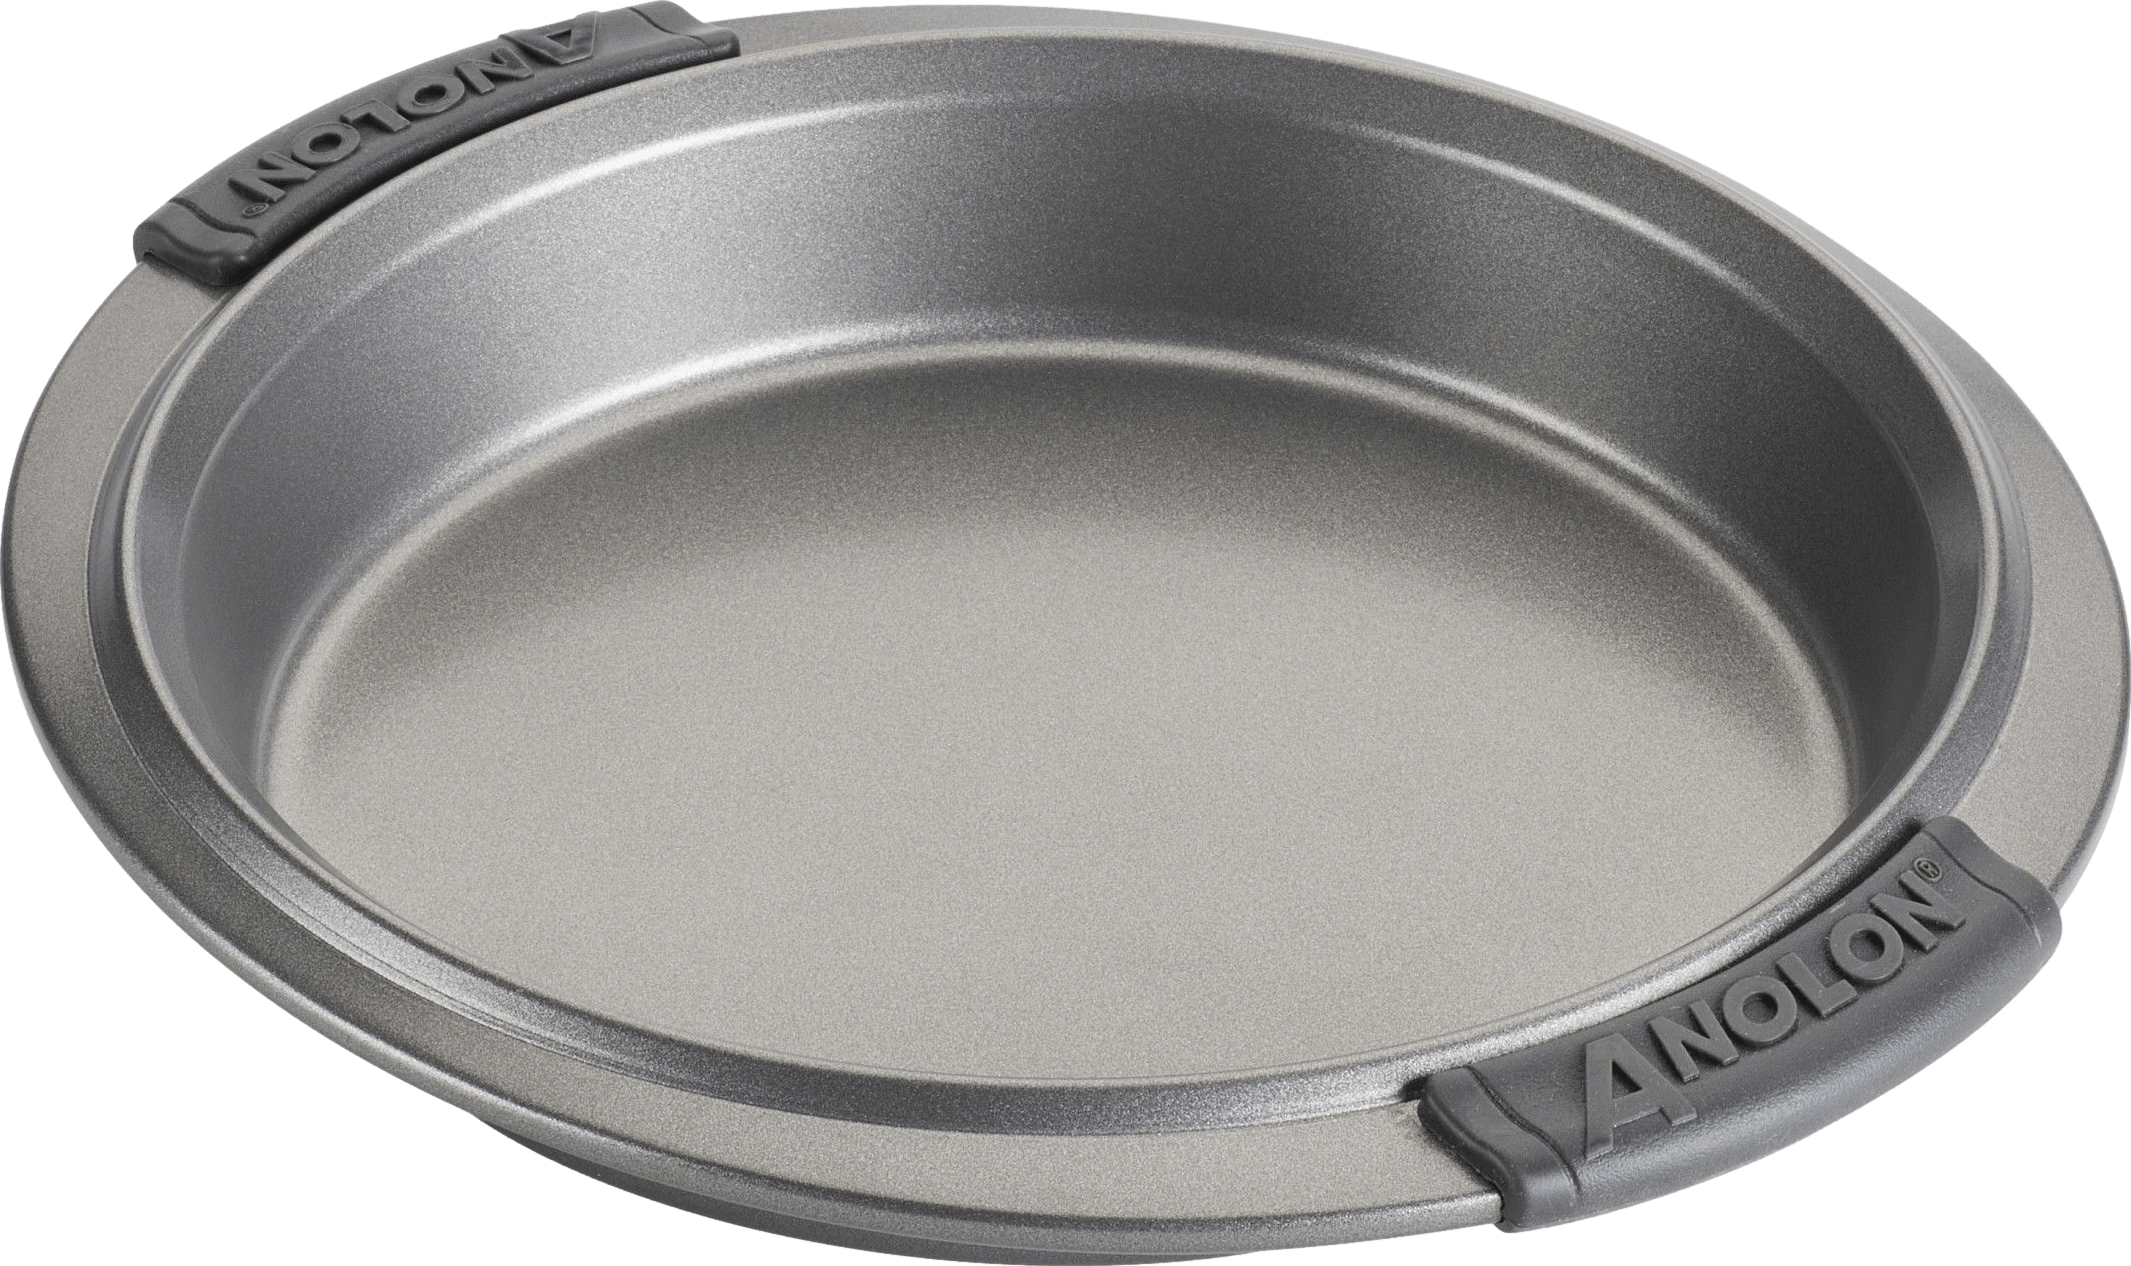 9-Inch Round Cake Pan with Silicone Grips – Anolon